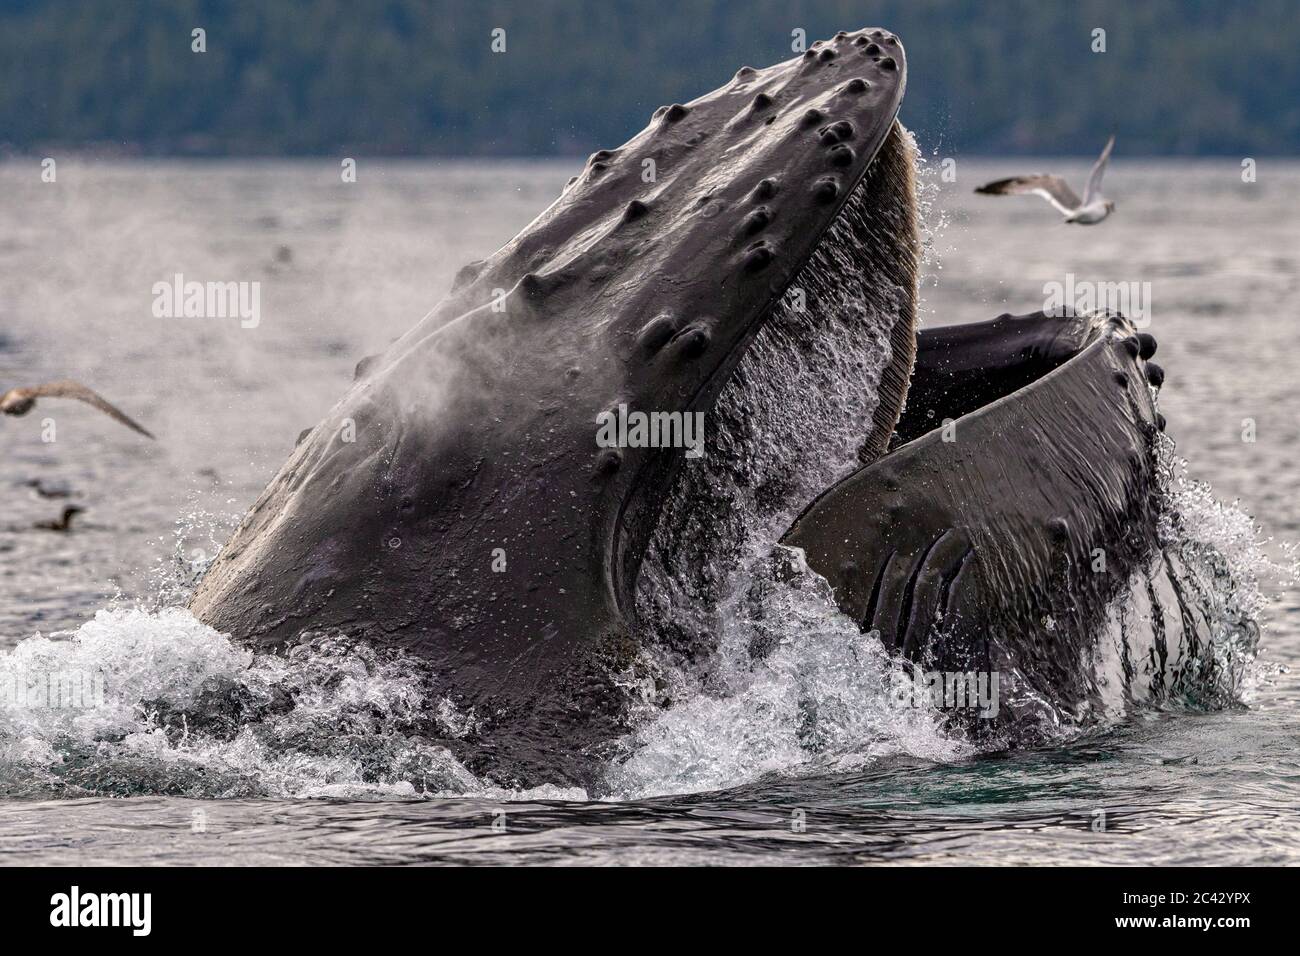 Humpback whale lunge feeding near the Broughton Archipelago, First Nations Territory, British Columbia, Canada. Stock Photo